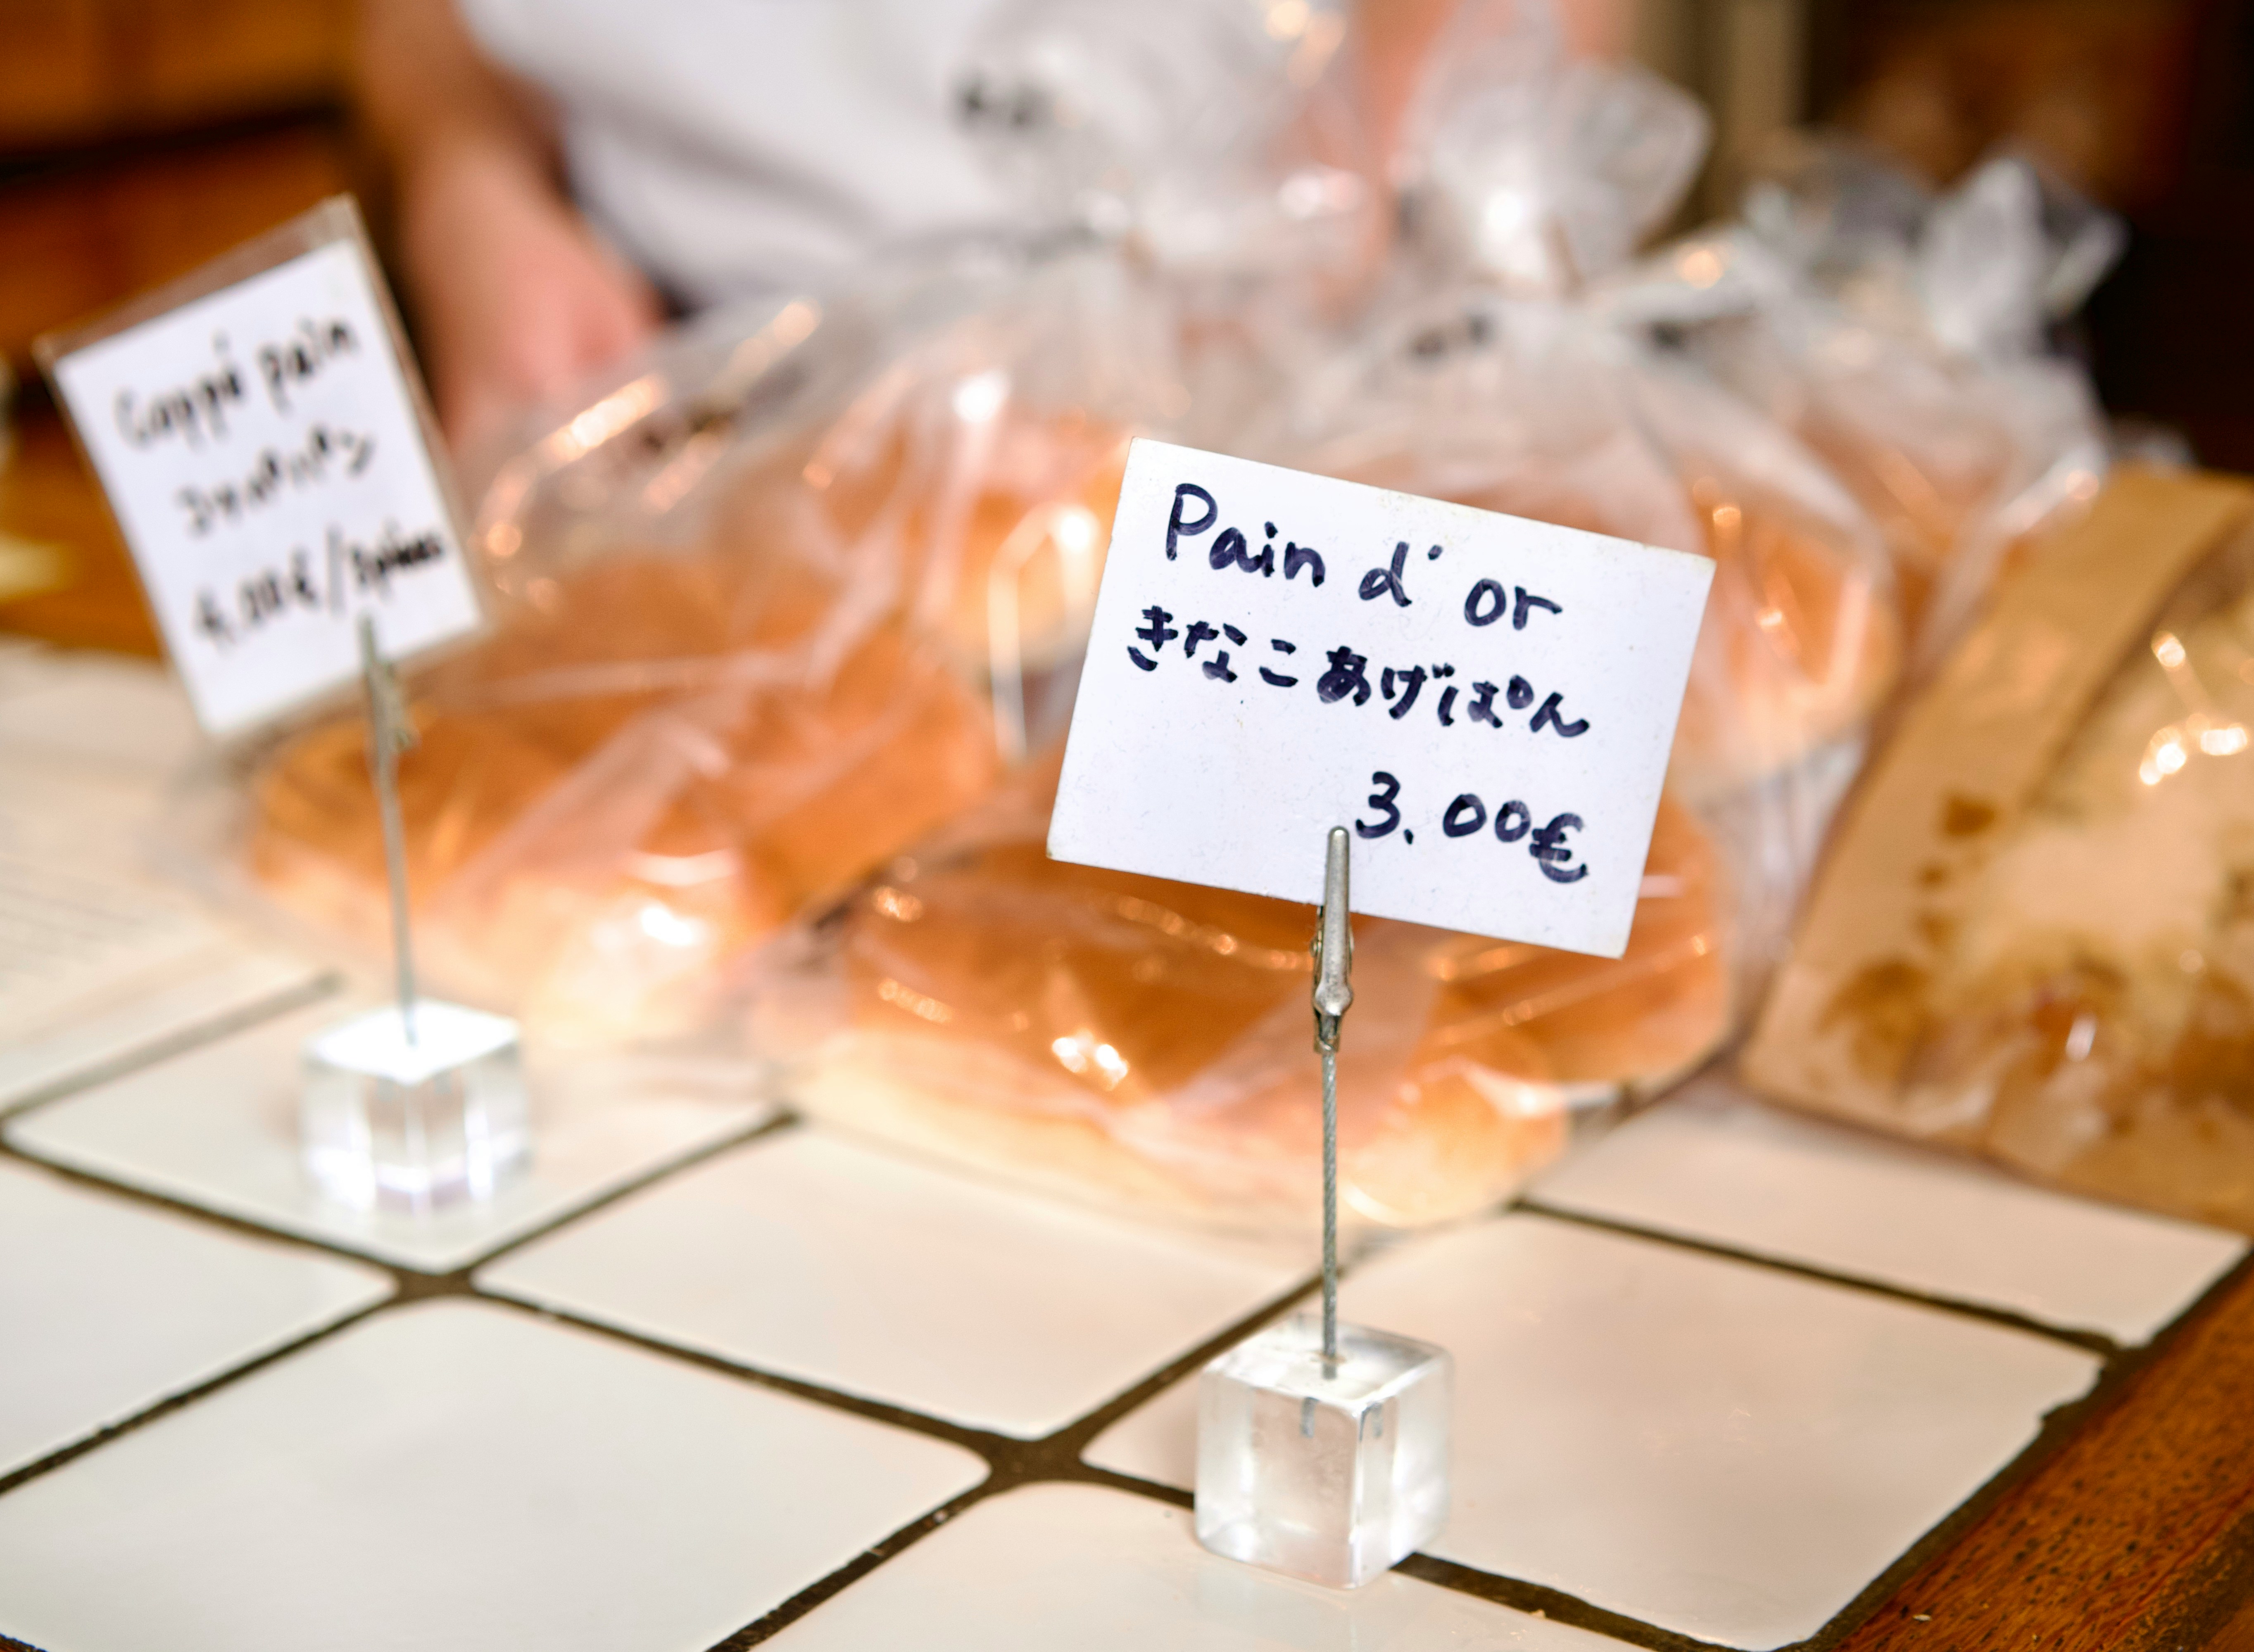 A photo of signs indicating the name and price of baked goods in multiple languages